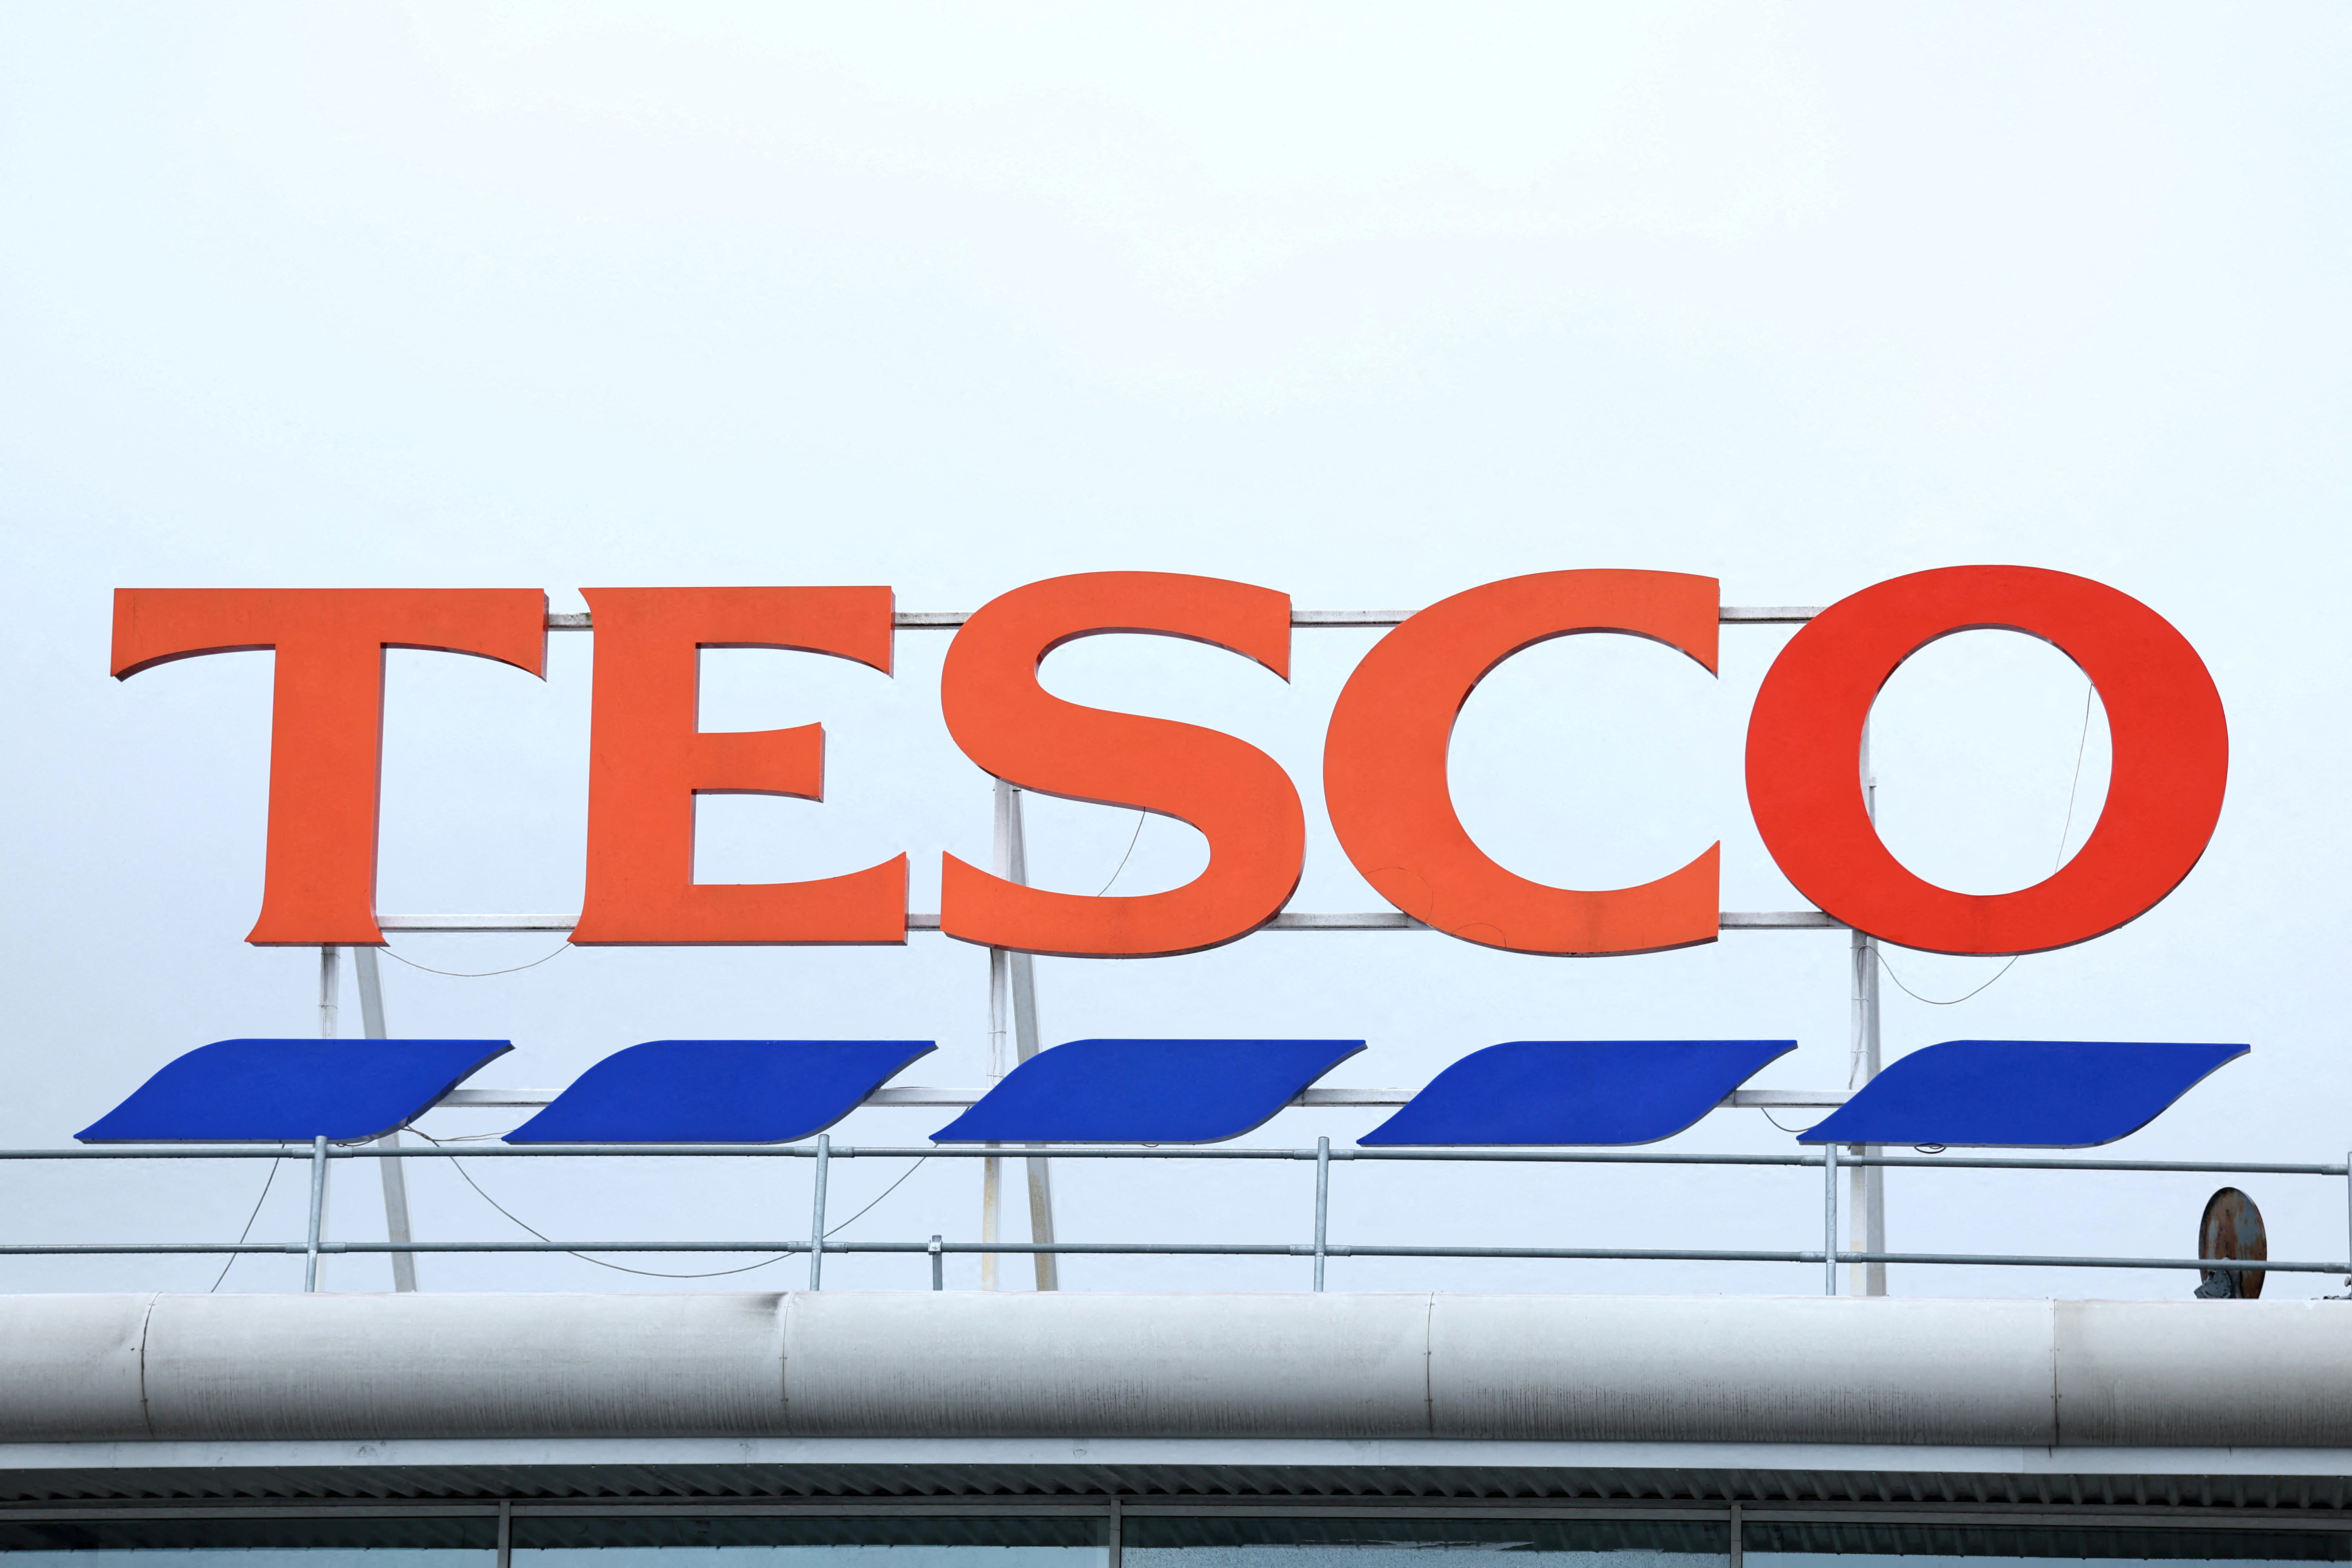 As Britons target cheaper food, Tesco cuts branded products in